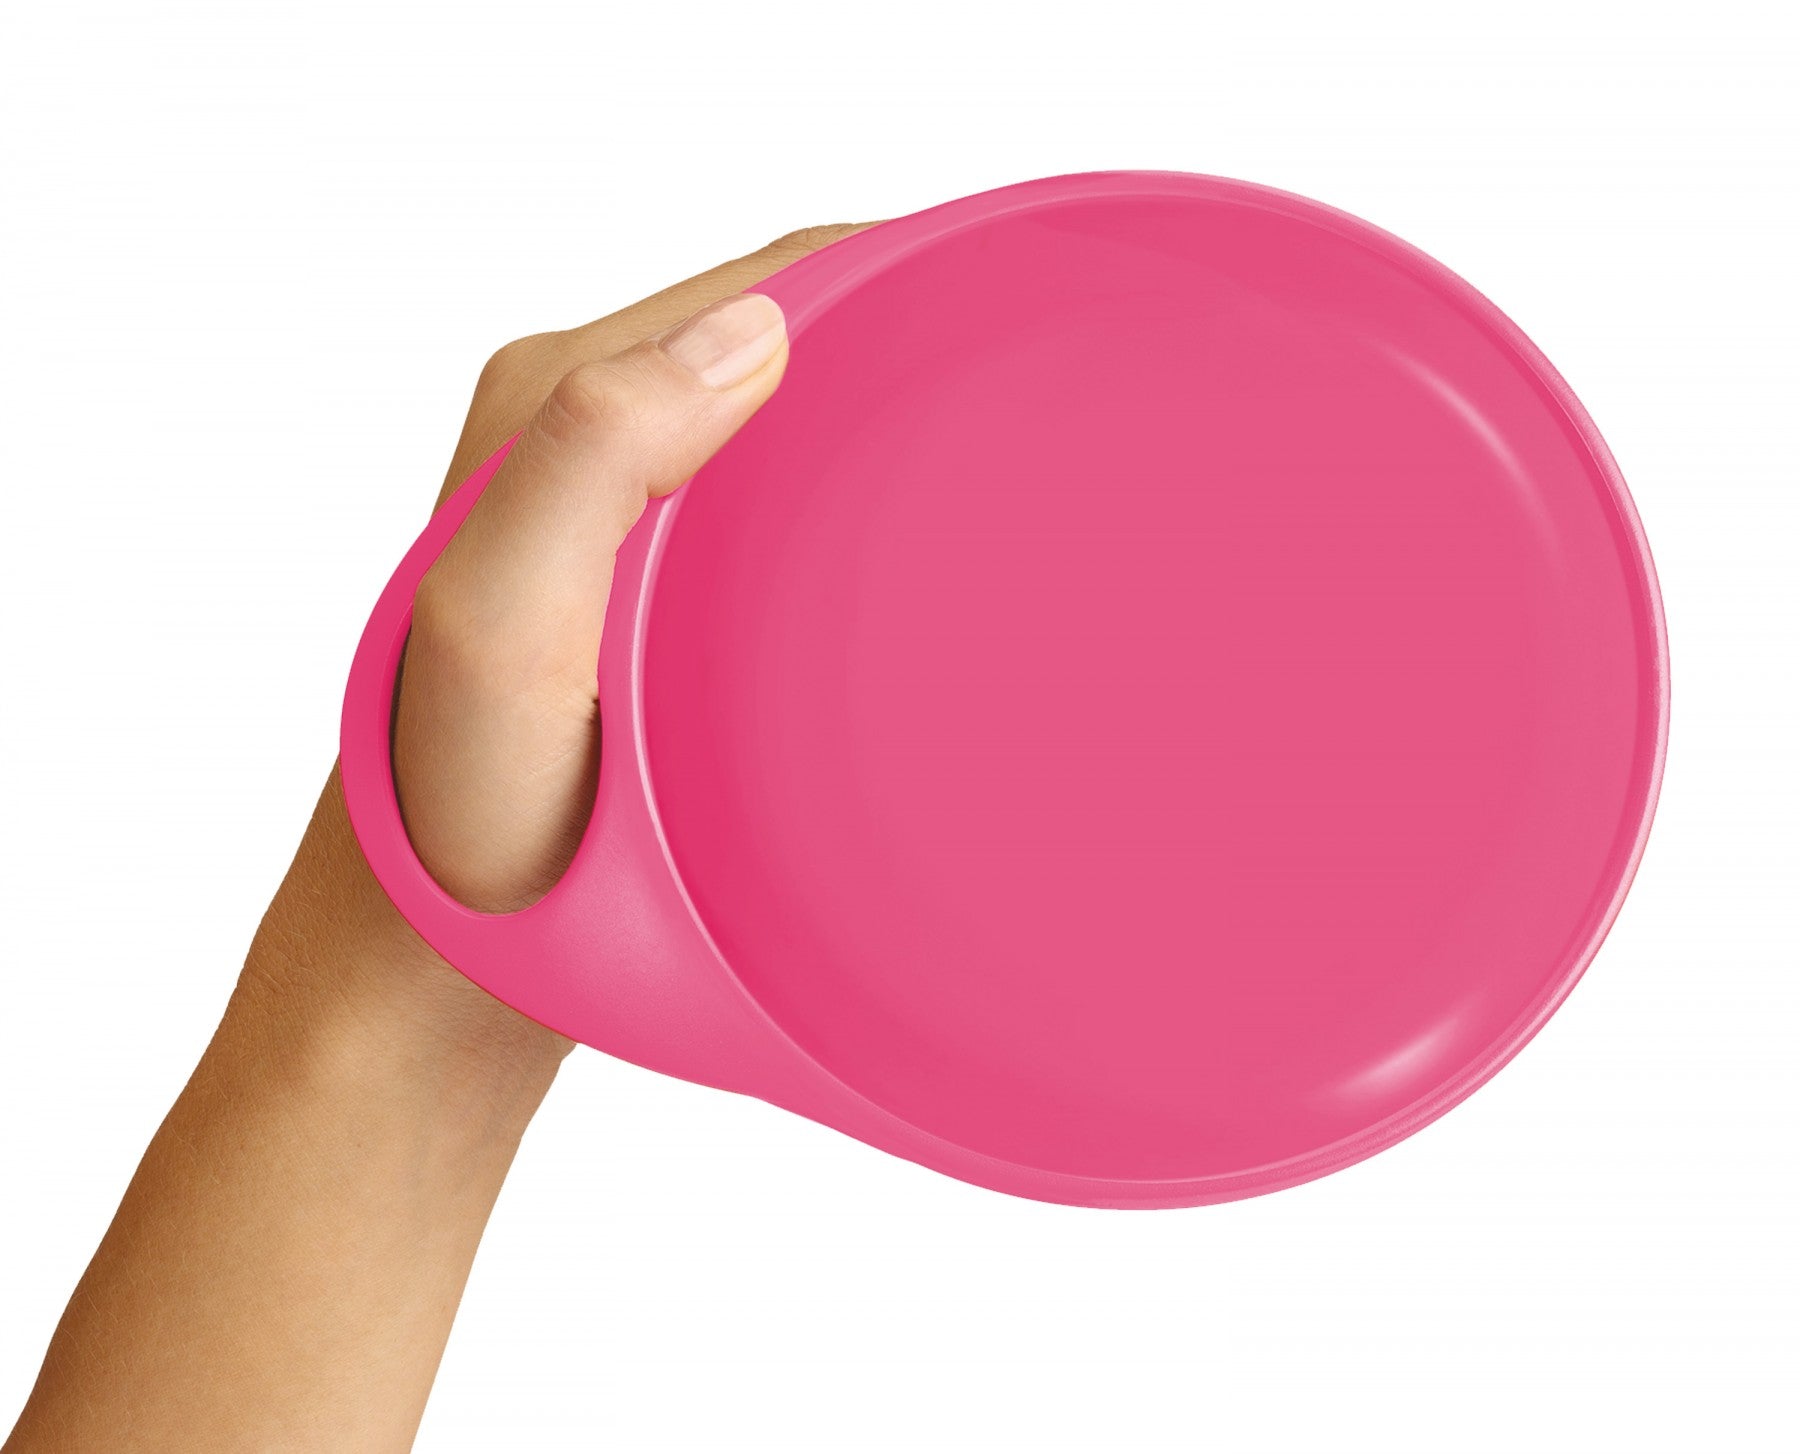 Brother Max - 2 Easy-Hold Plates (Pink/ Green)